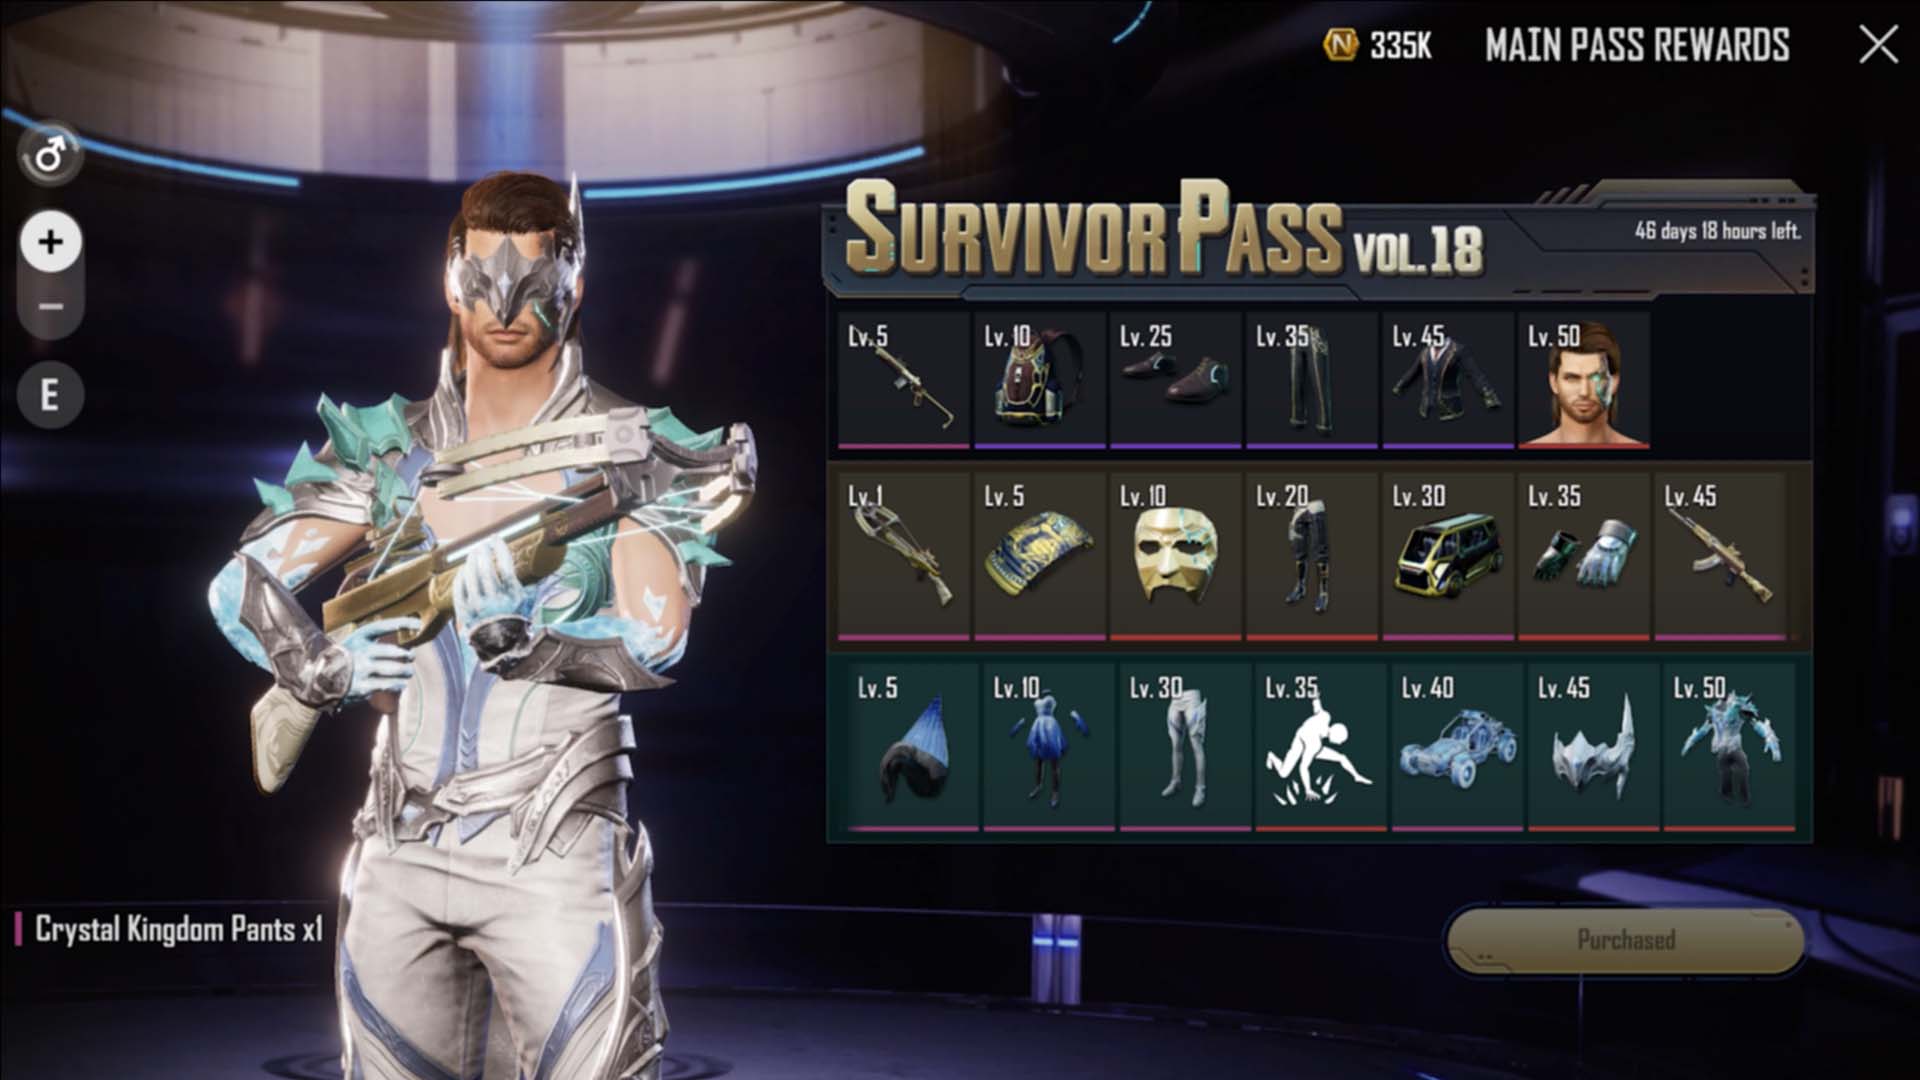 New State Mobile Survivor Pass Vol. 18: Achieve a certain pass level to get a free character!